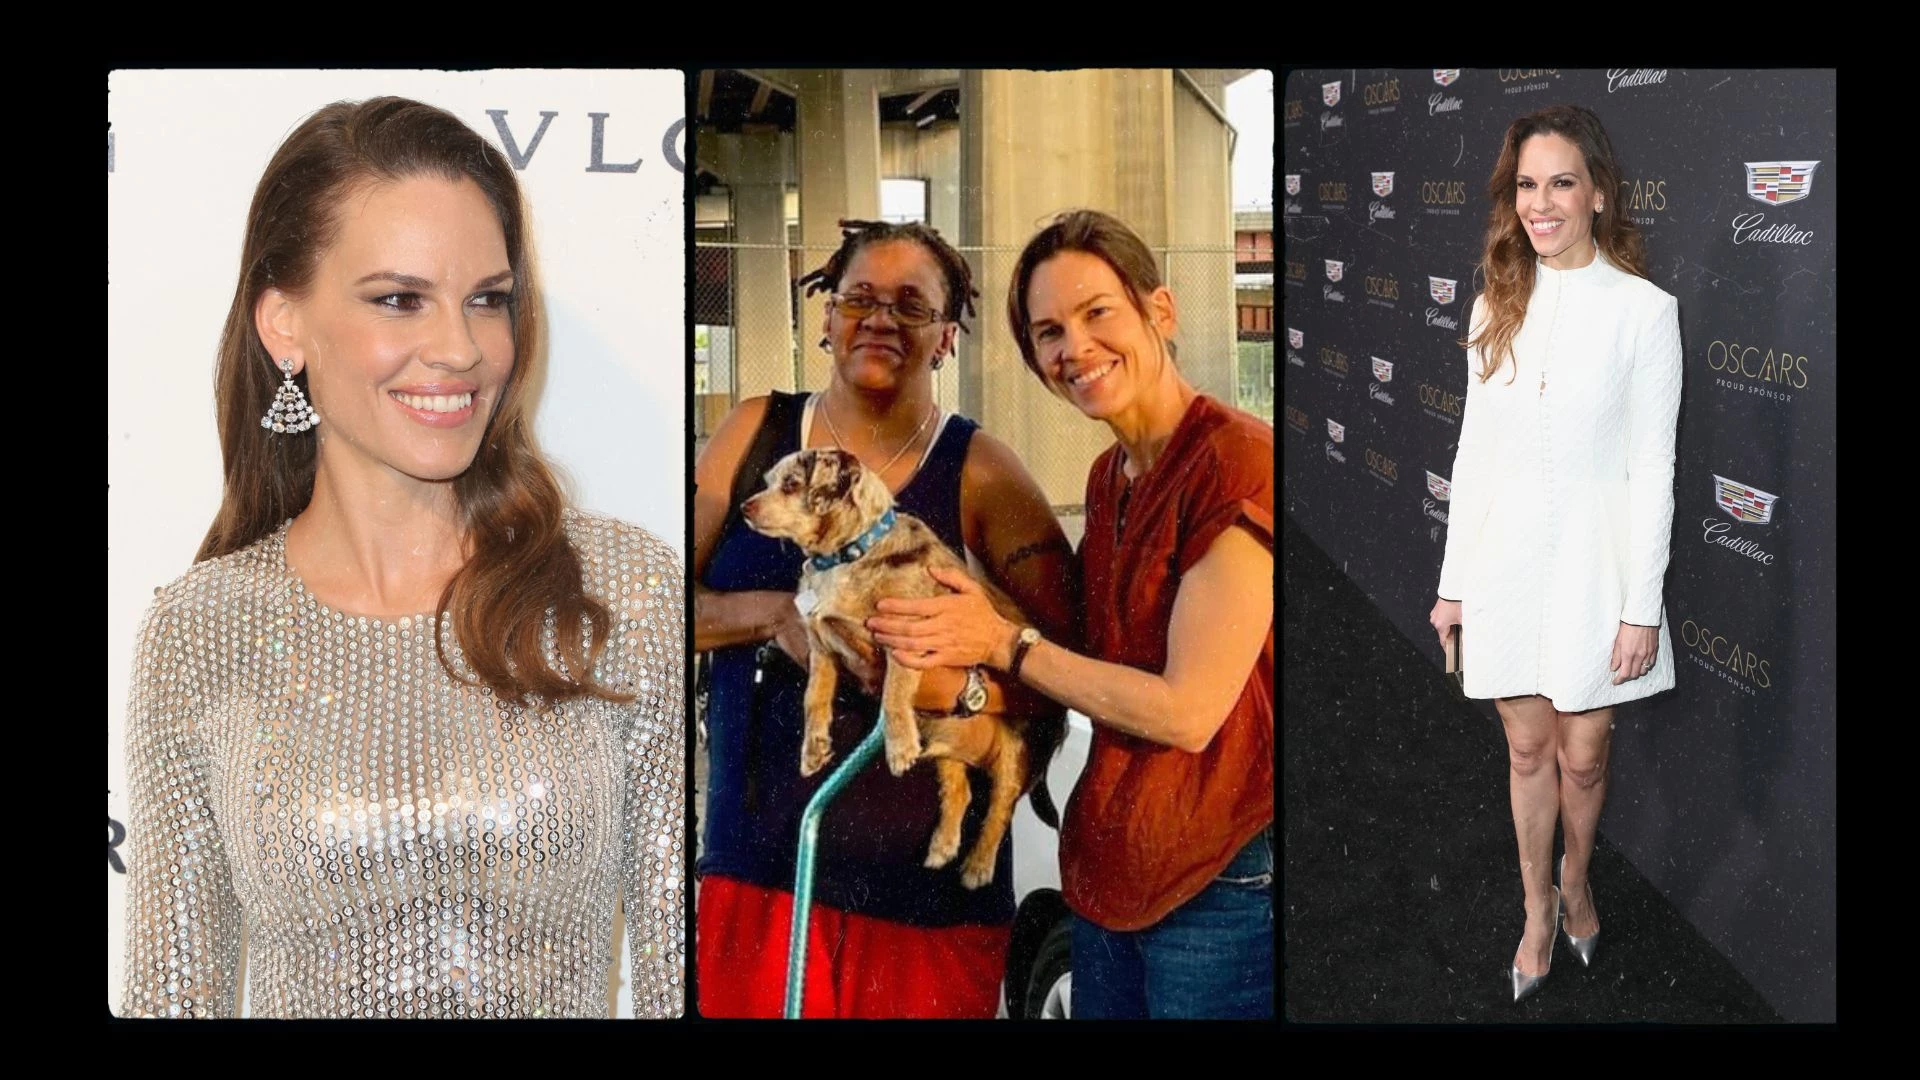 Hilary Swank Rescues Dog in Albany - But What's She Doing Here?